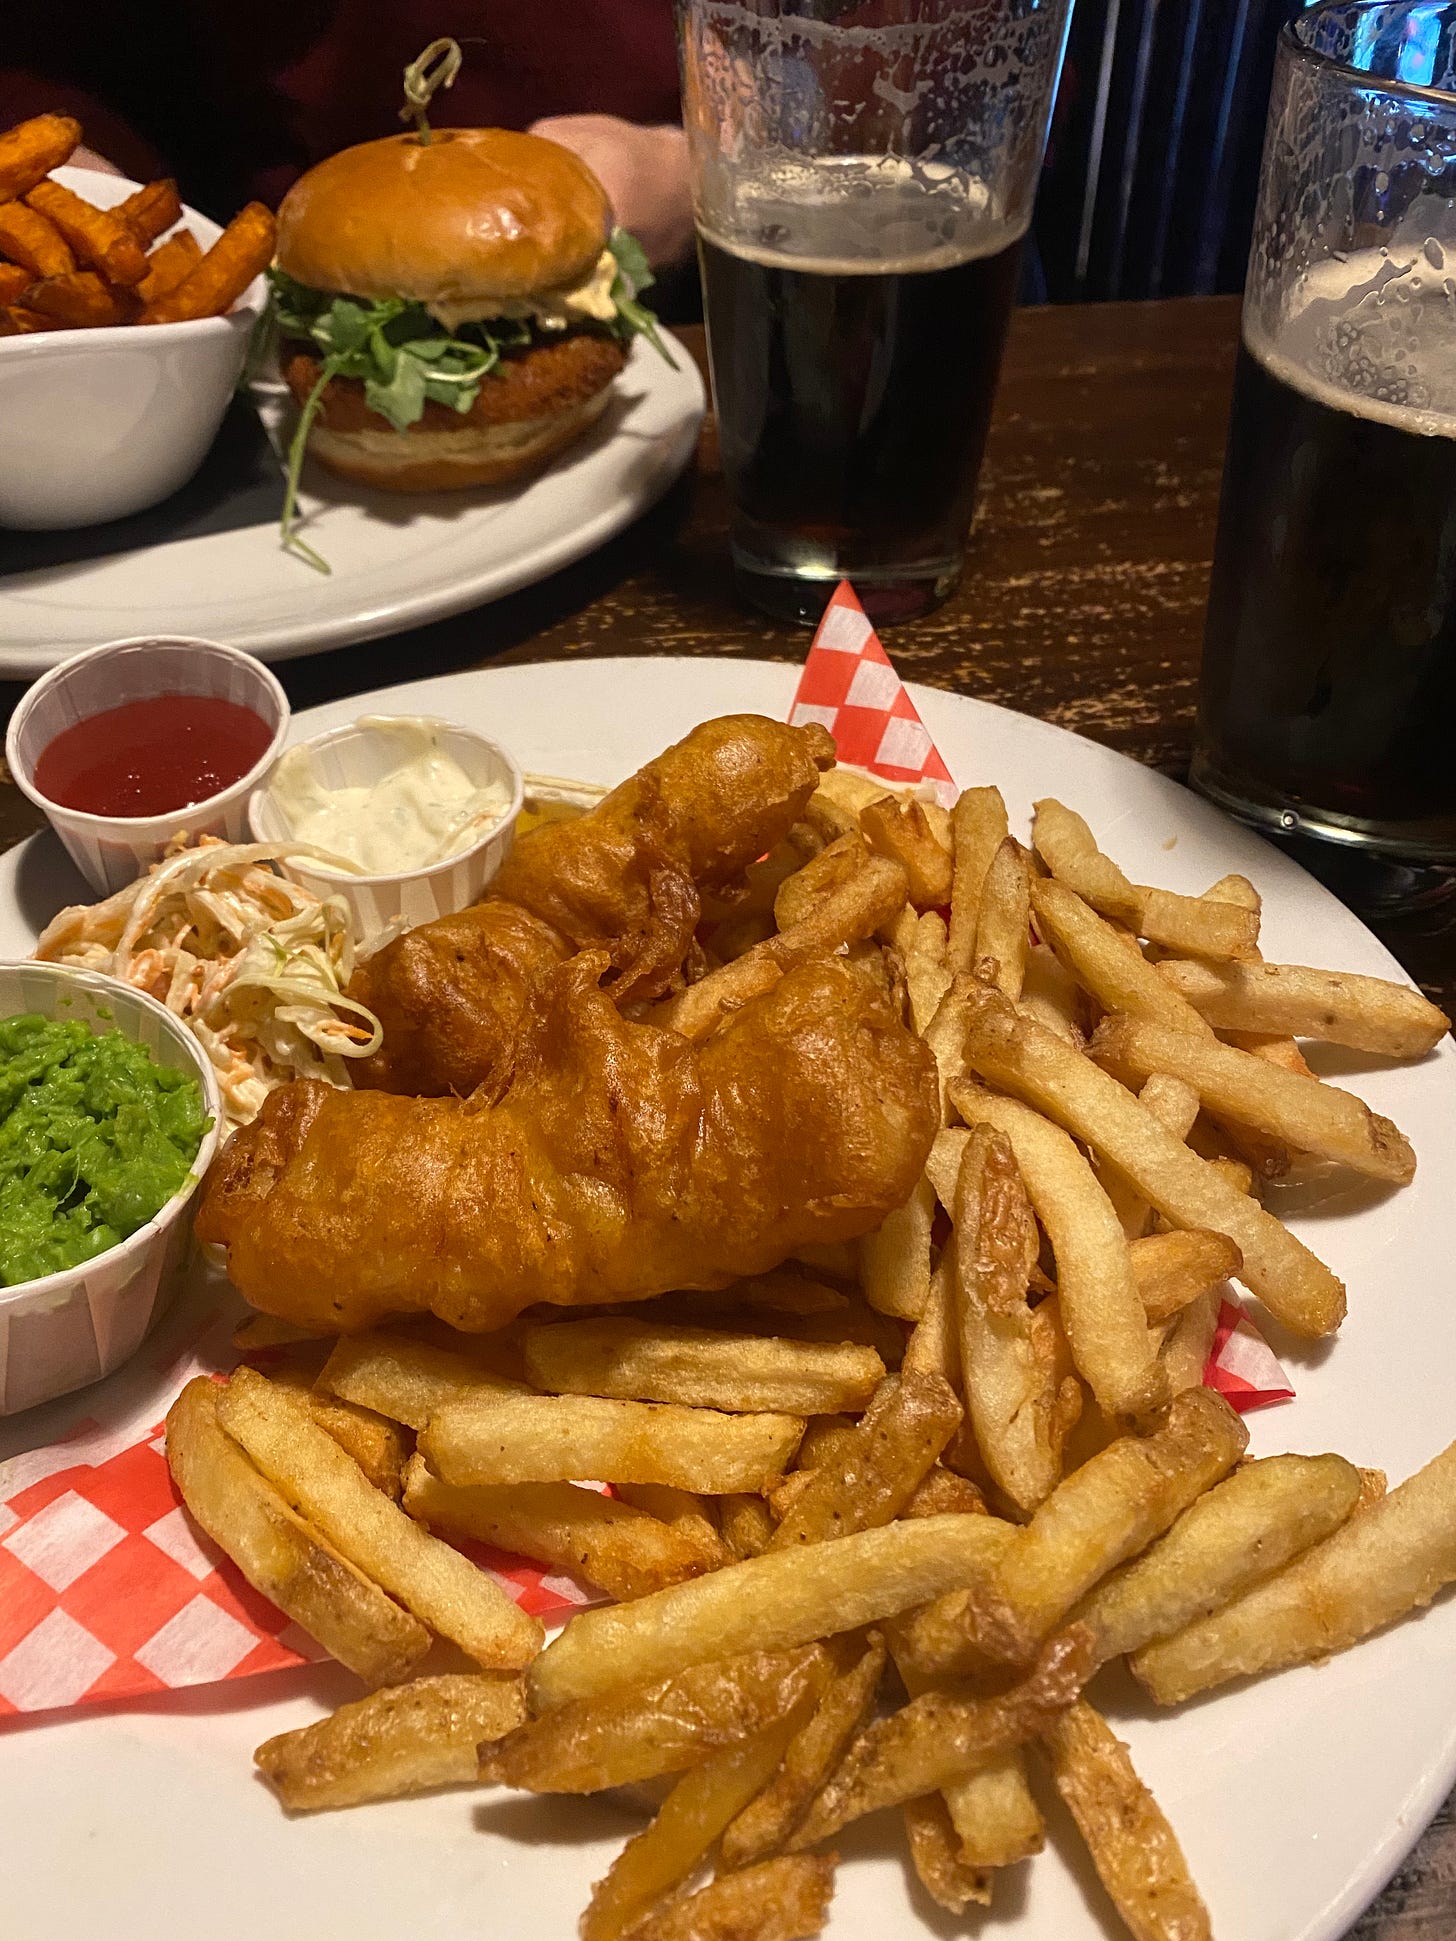 Two plates on a weathered wooden pub table, with glasses of dark beer beside them. The plate in the foreground has fish and chips with tartar sauce and ketchup in paper cups, next to a small pile of coleslaw and a slightly larger paper cup of mushy peas. The plate in the background has a veggie burger and a bowl of yam fries.